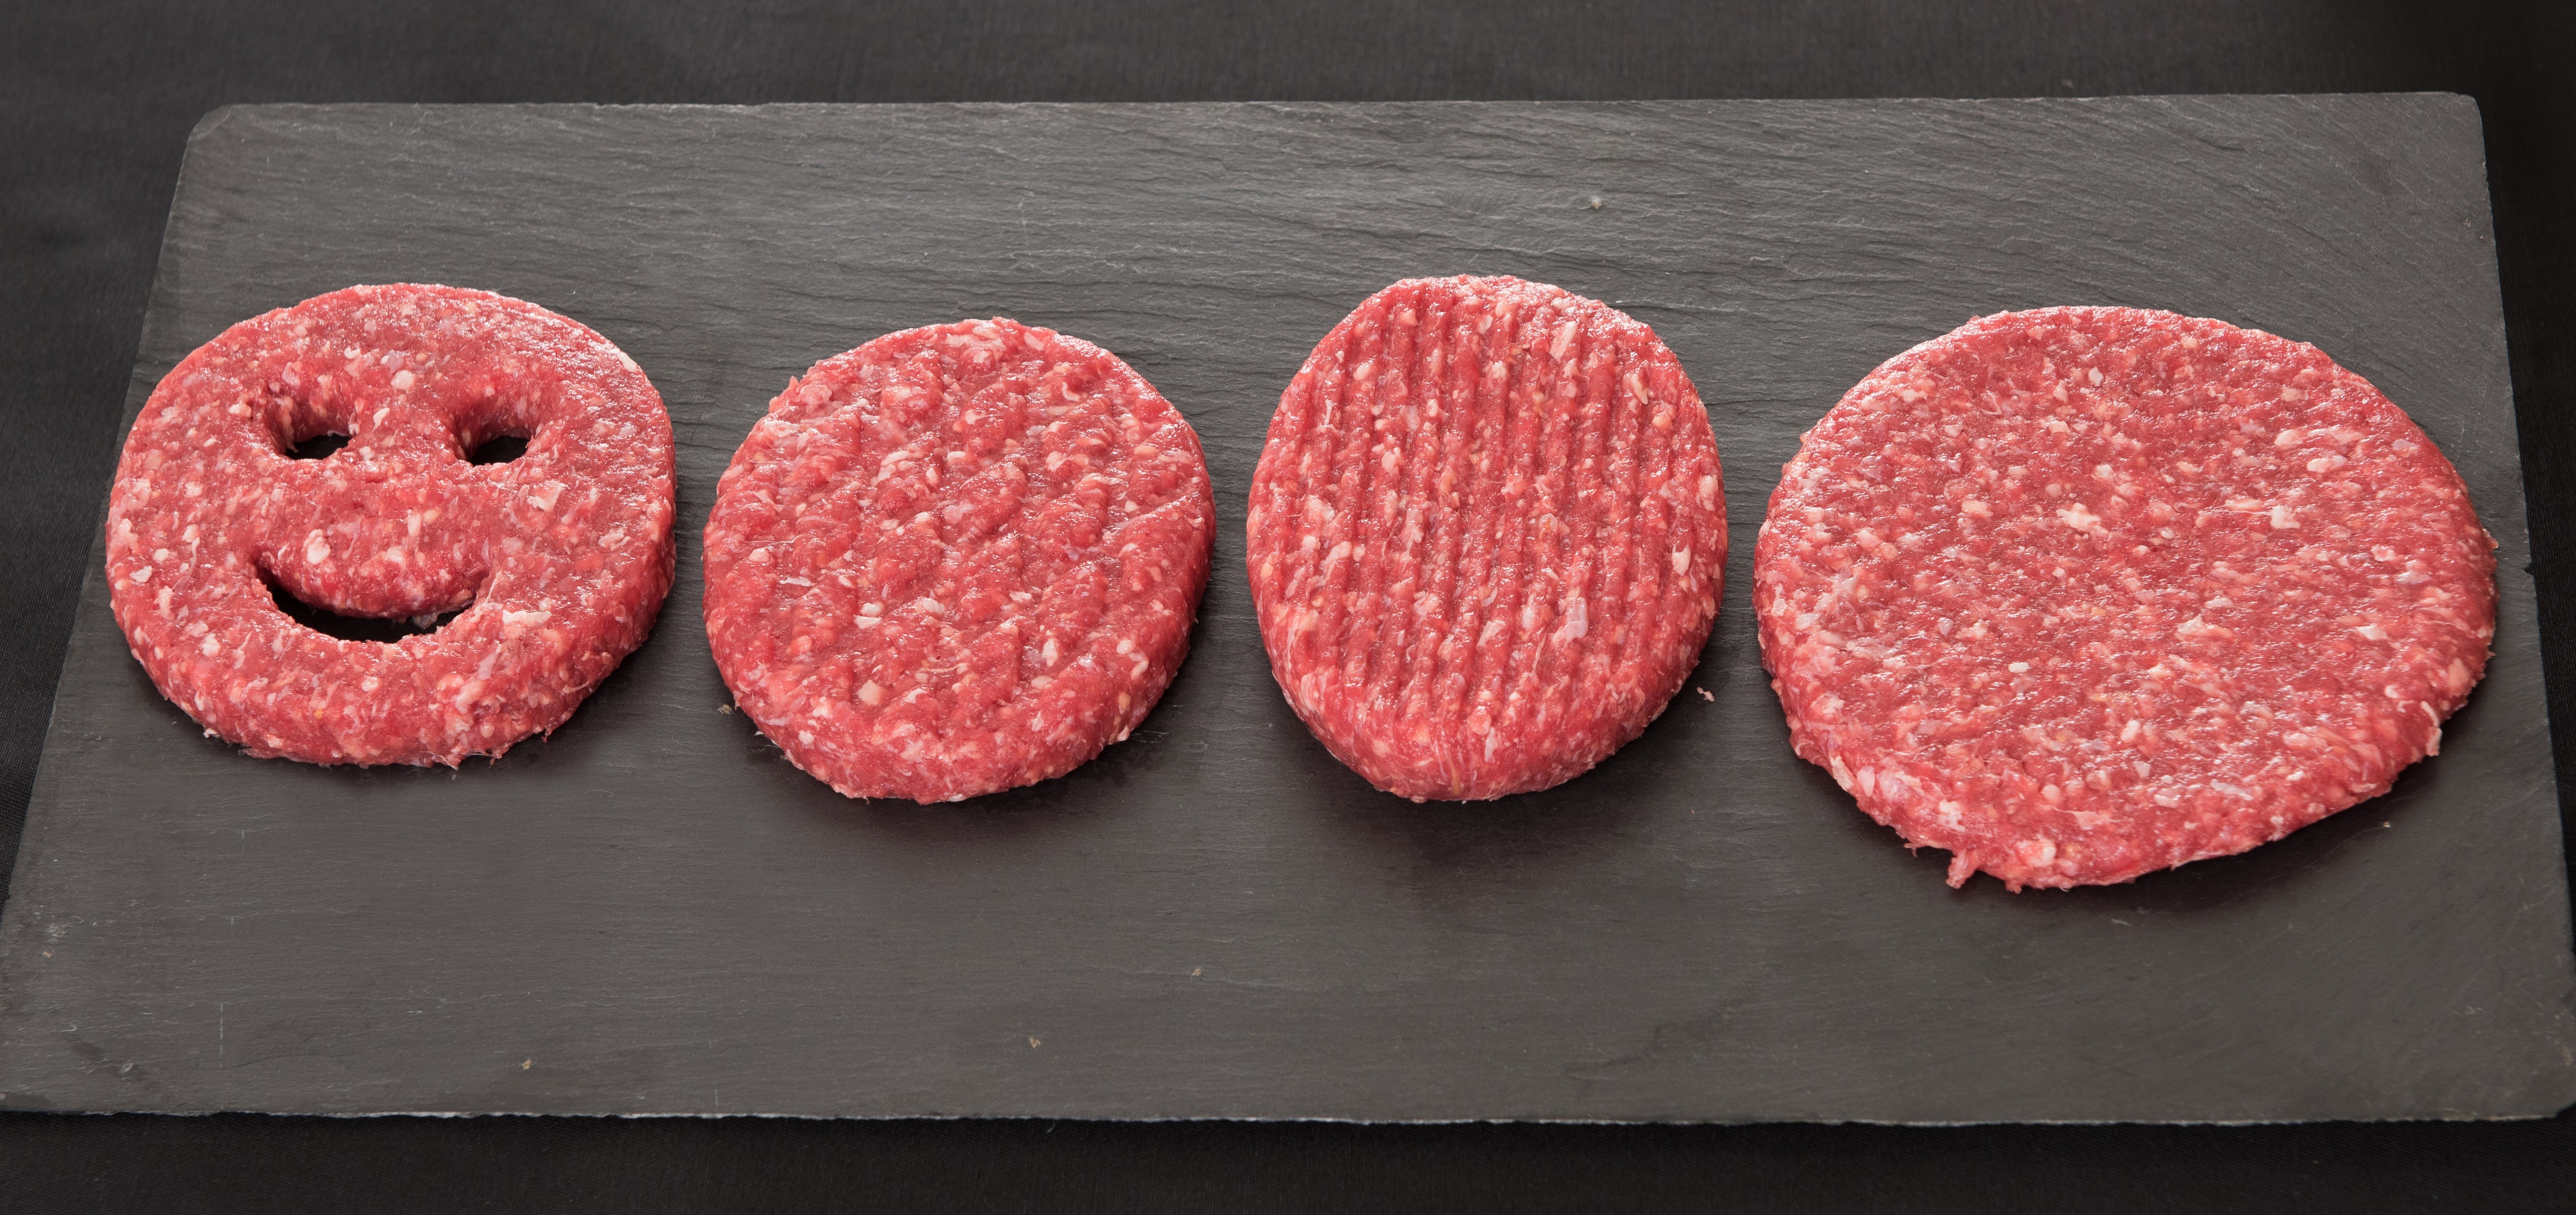 Whatever type of burger patty you want to produce, Marel solutions give you the flexibility to create a range of shapes, textures and volumes.